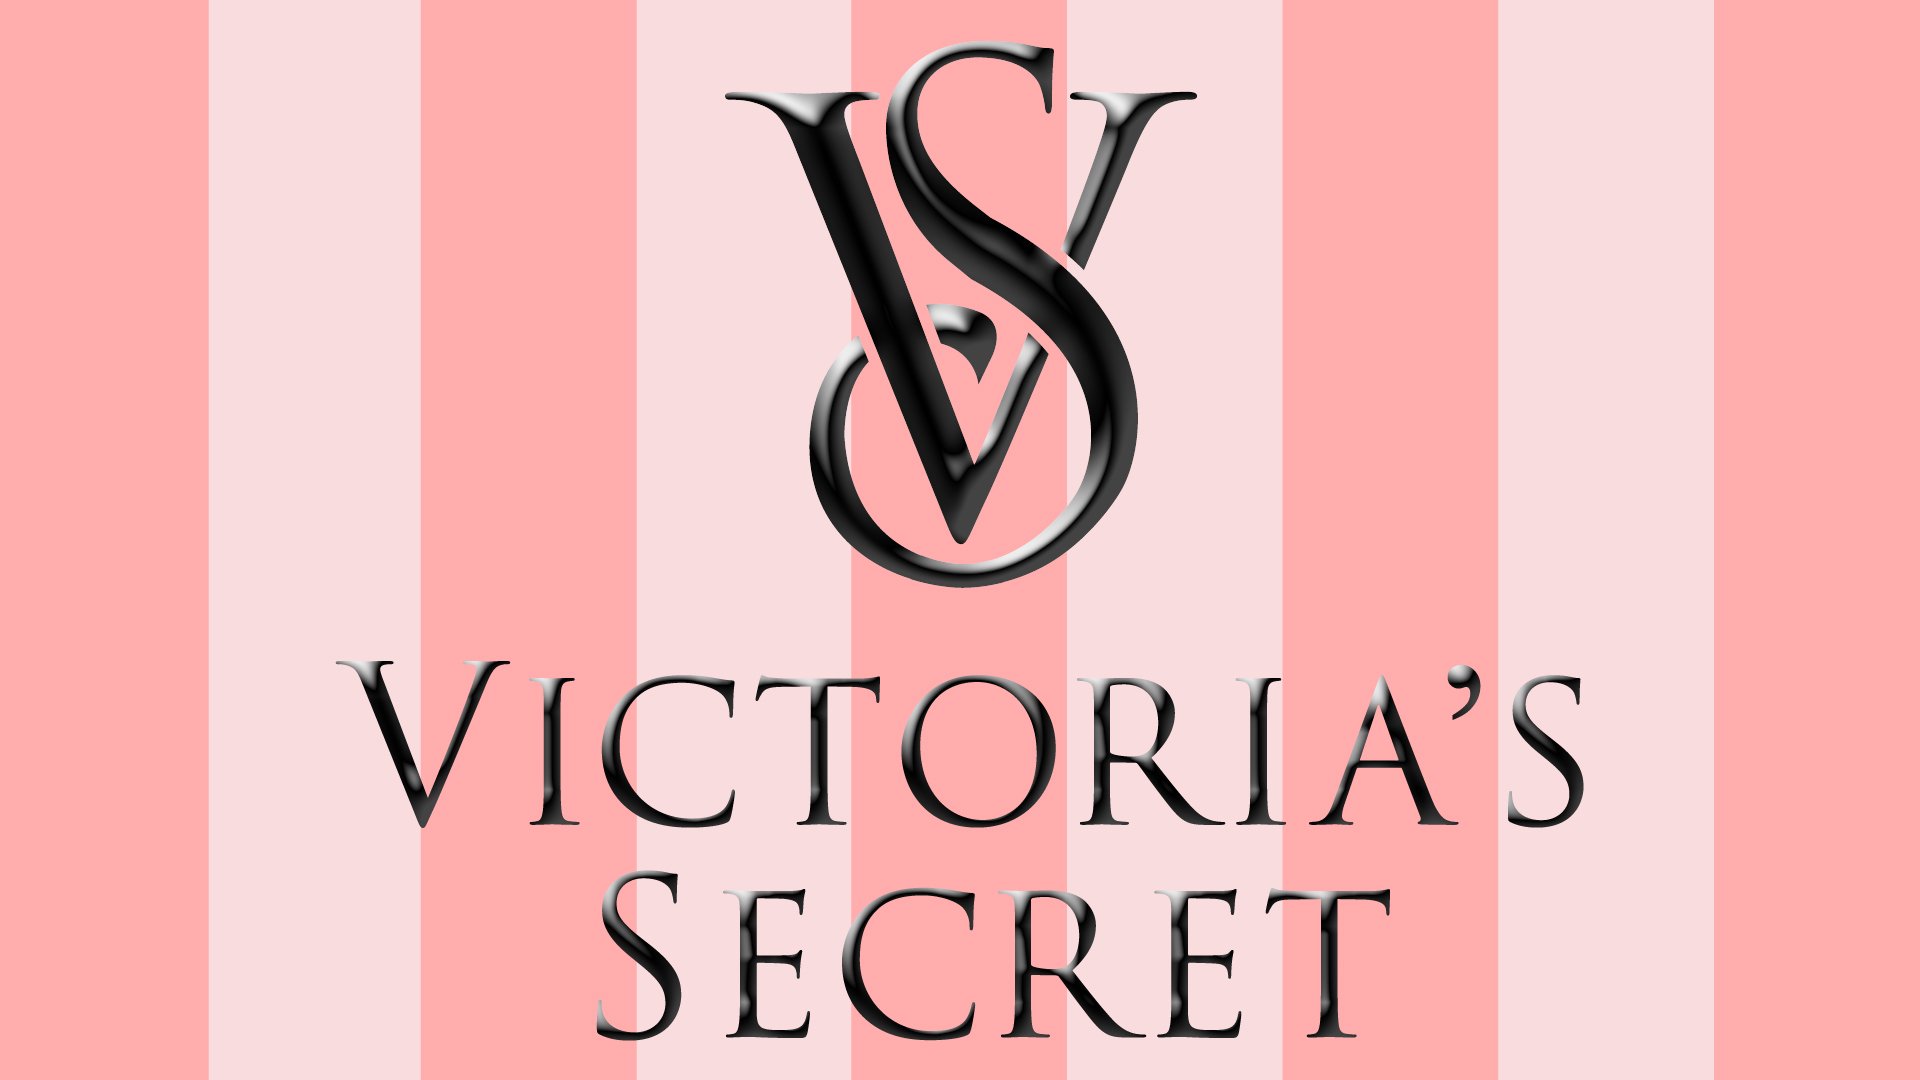 OPINION: Why Victoria's Secret Suddenly Lost Its CEO